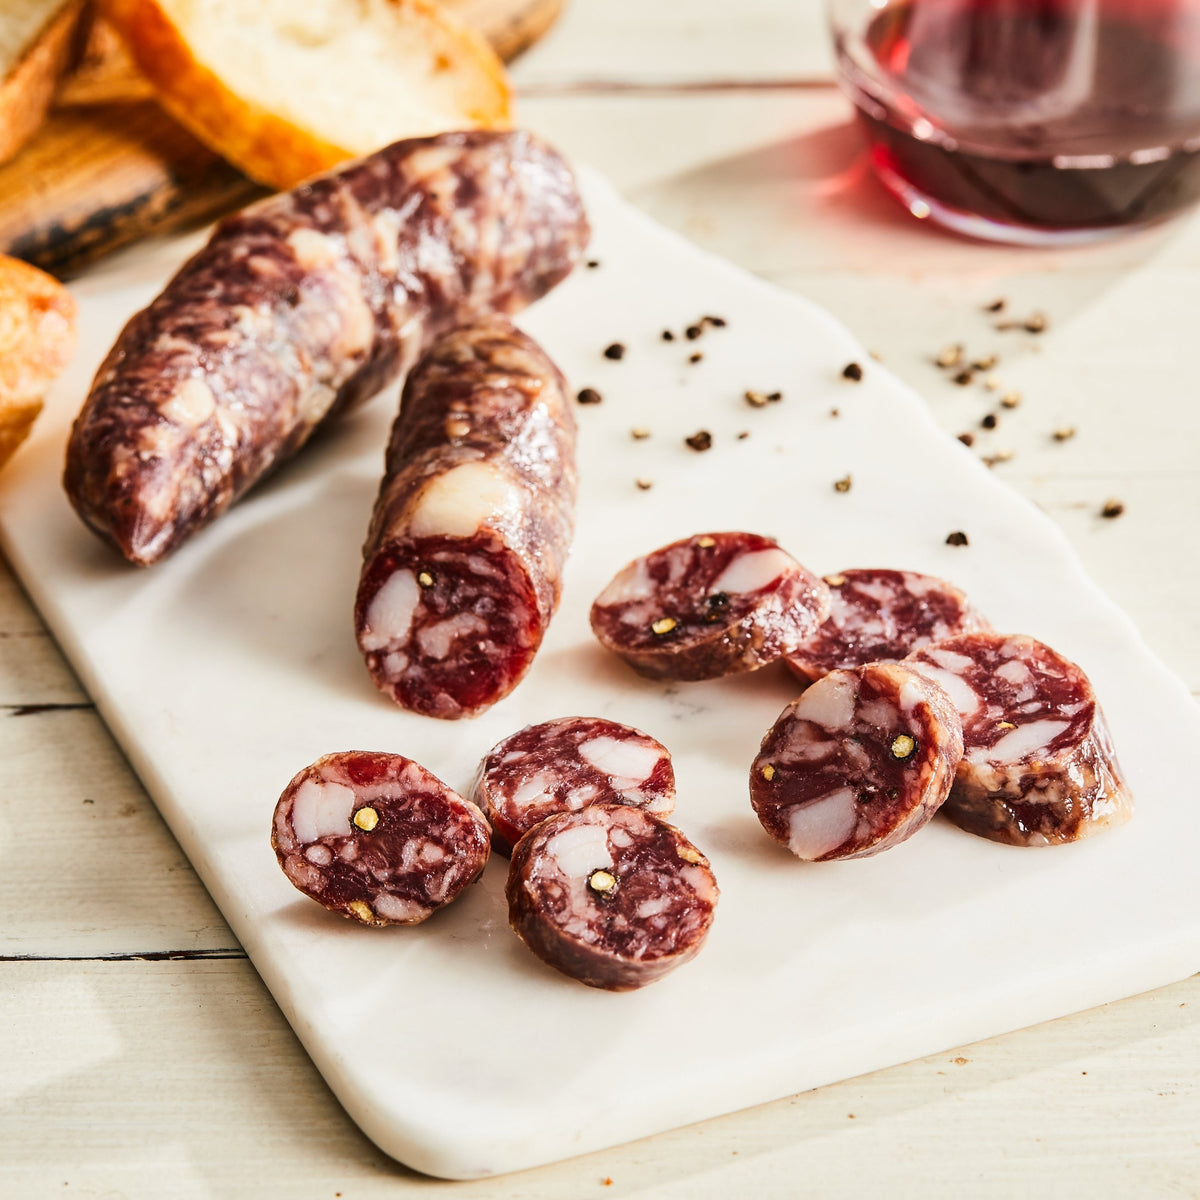 Image of Genoa salami. 1 link, 3oz. a classic Italian pork salami made with garlic, white wine, fennel seed, and black pepper